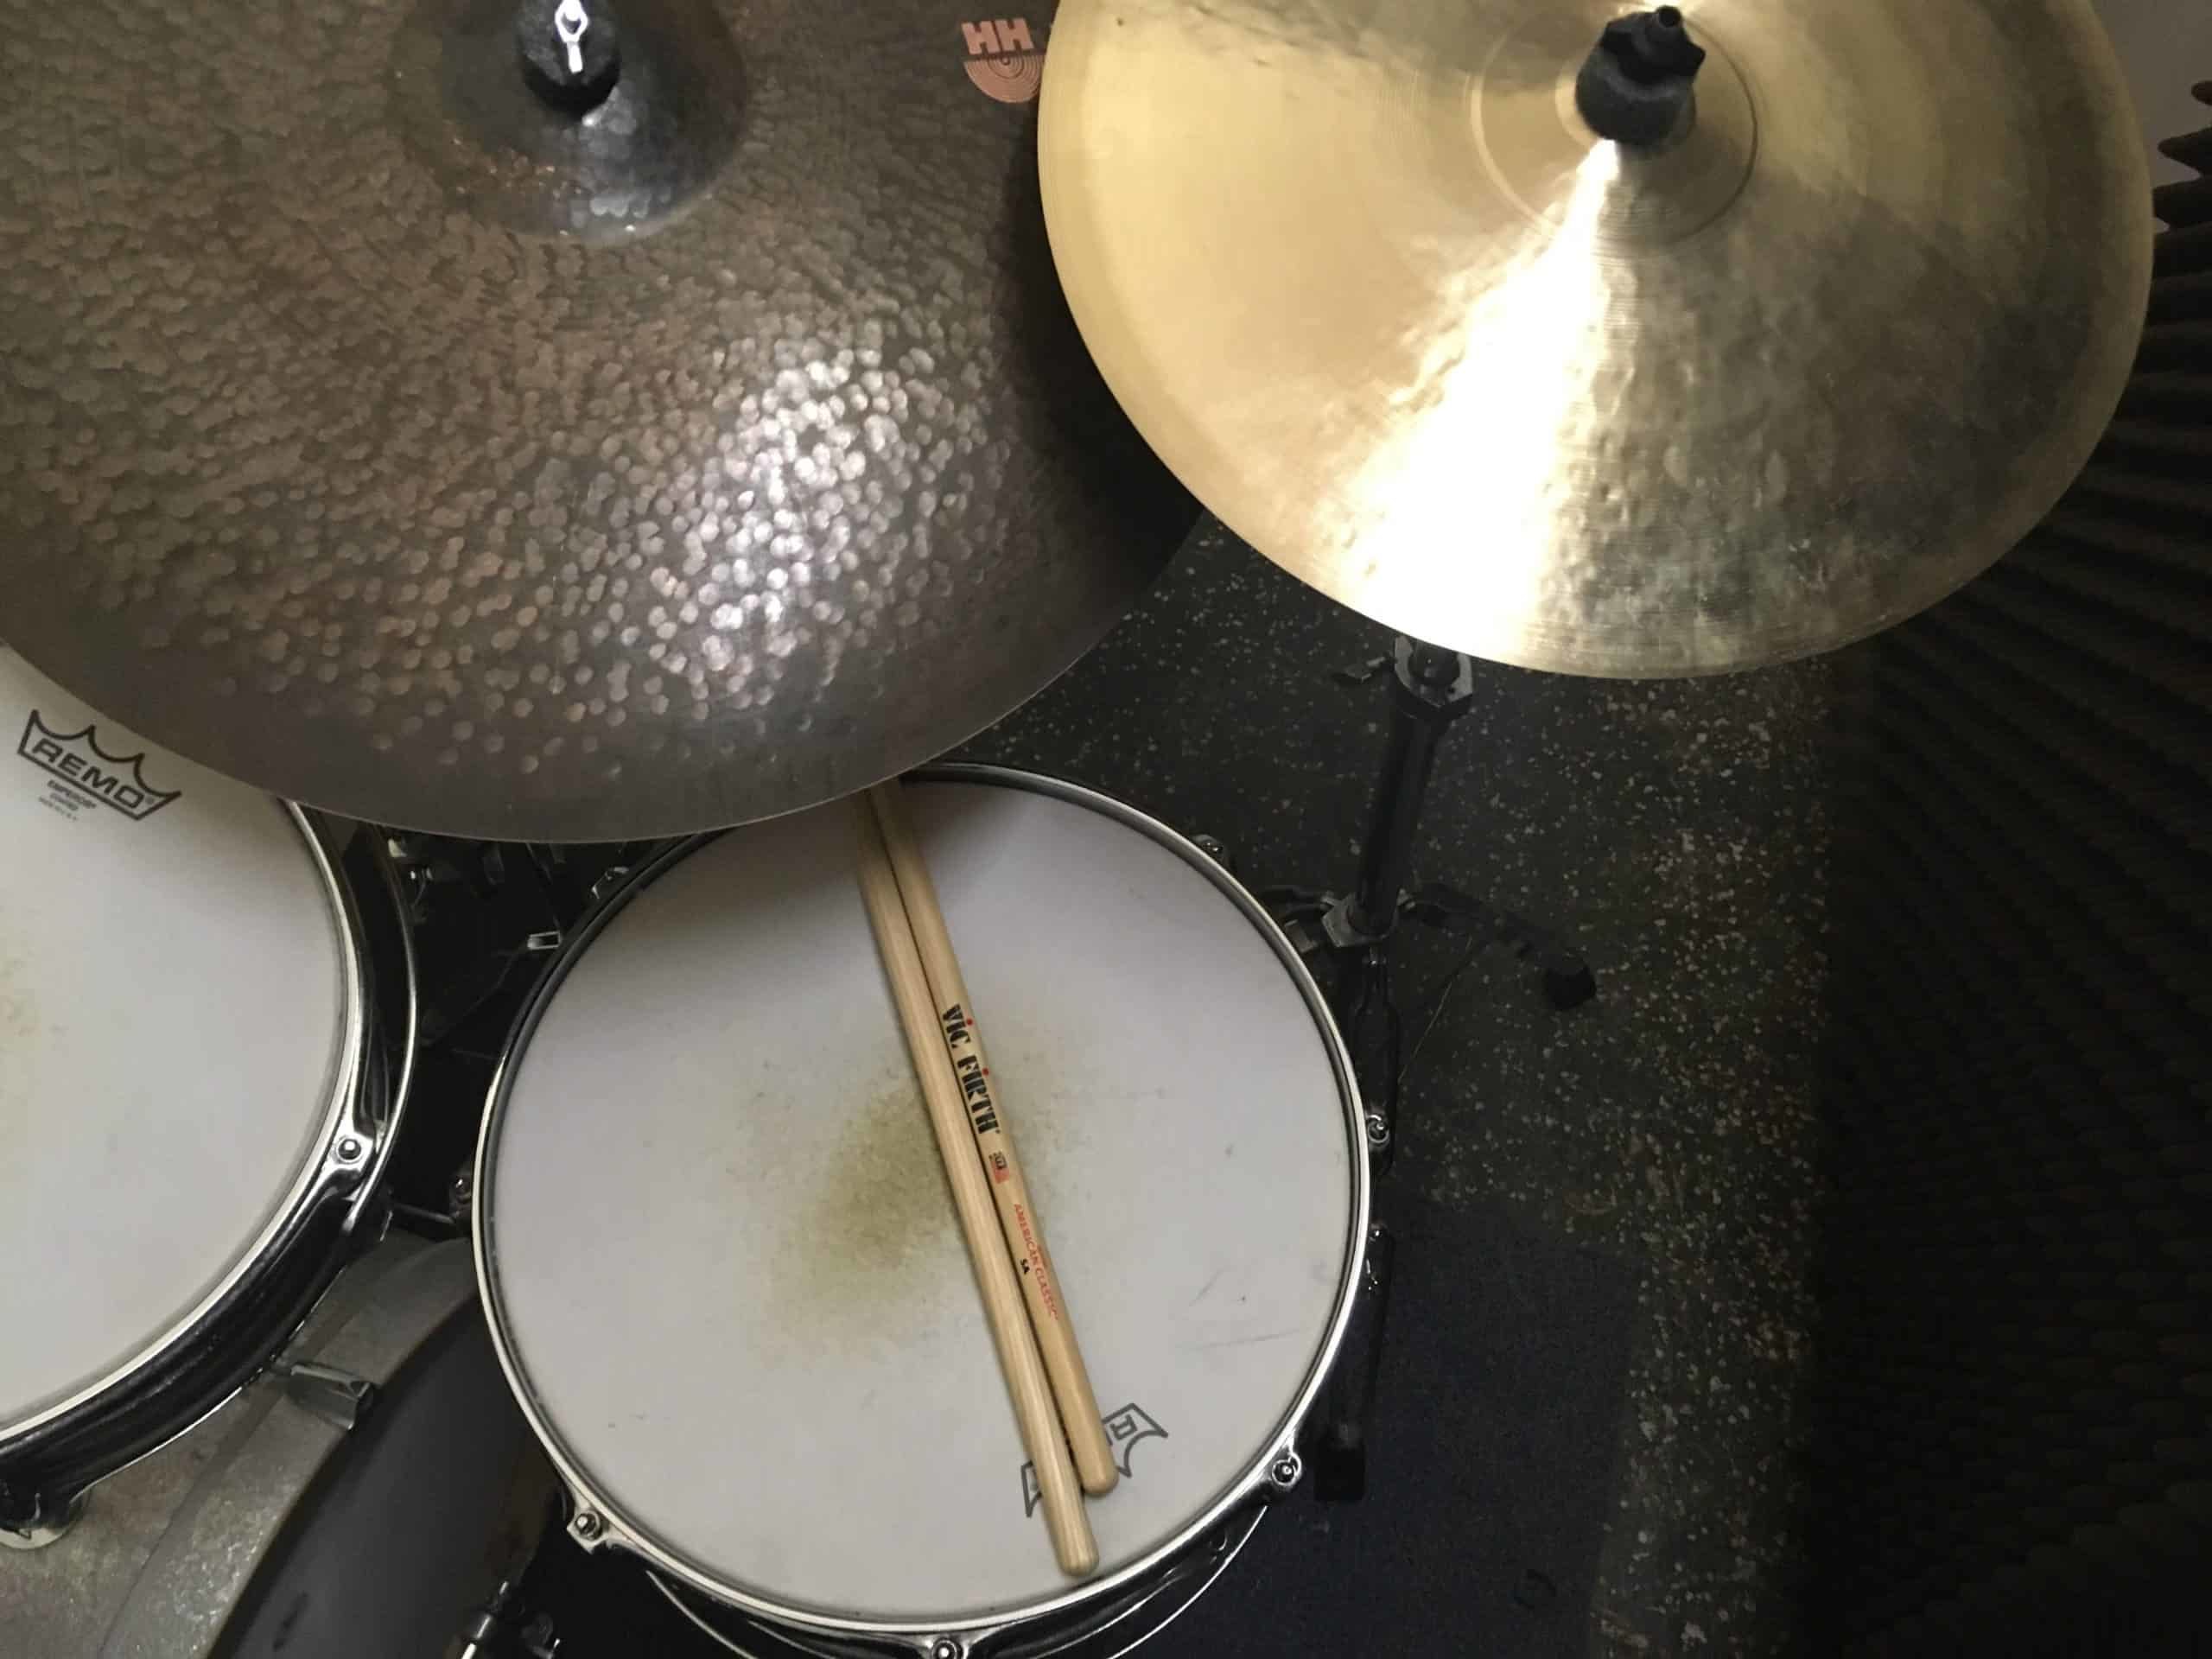 How to set up a drumset: Right Crash Cymbal